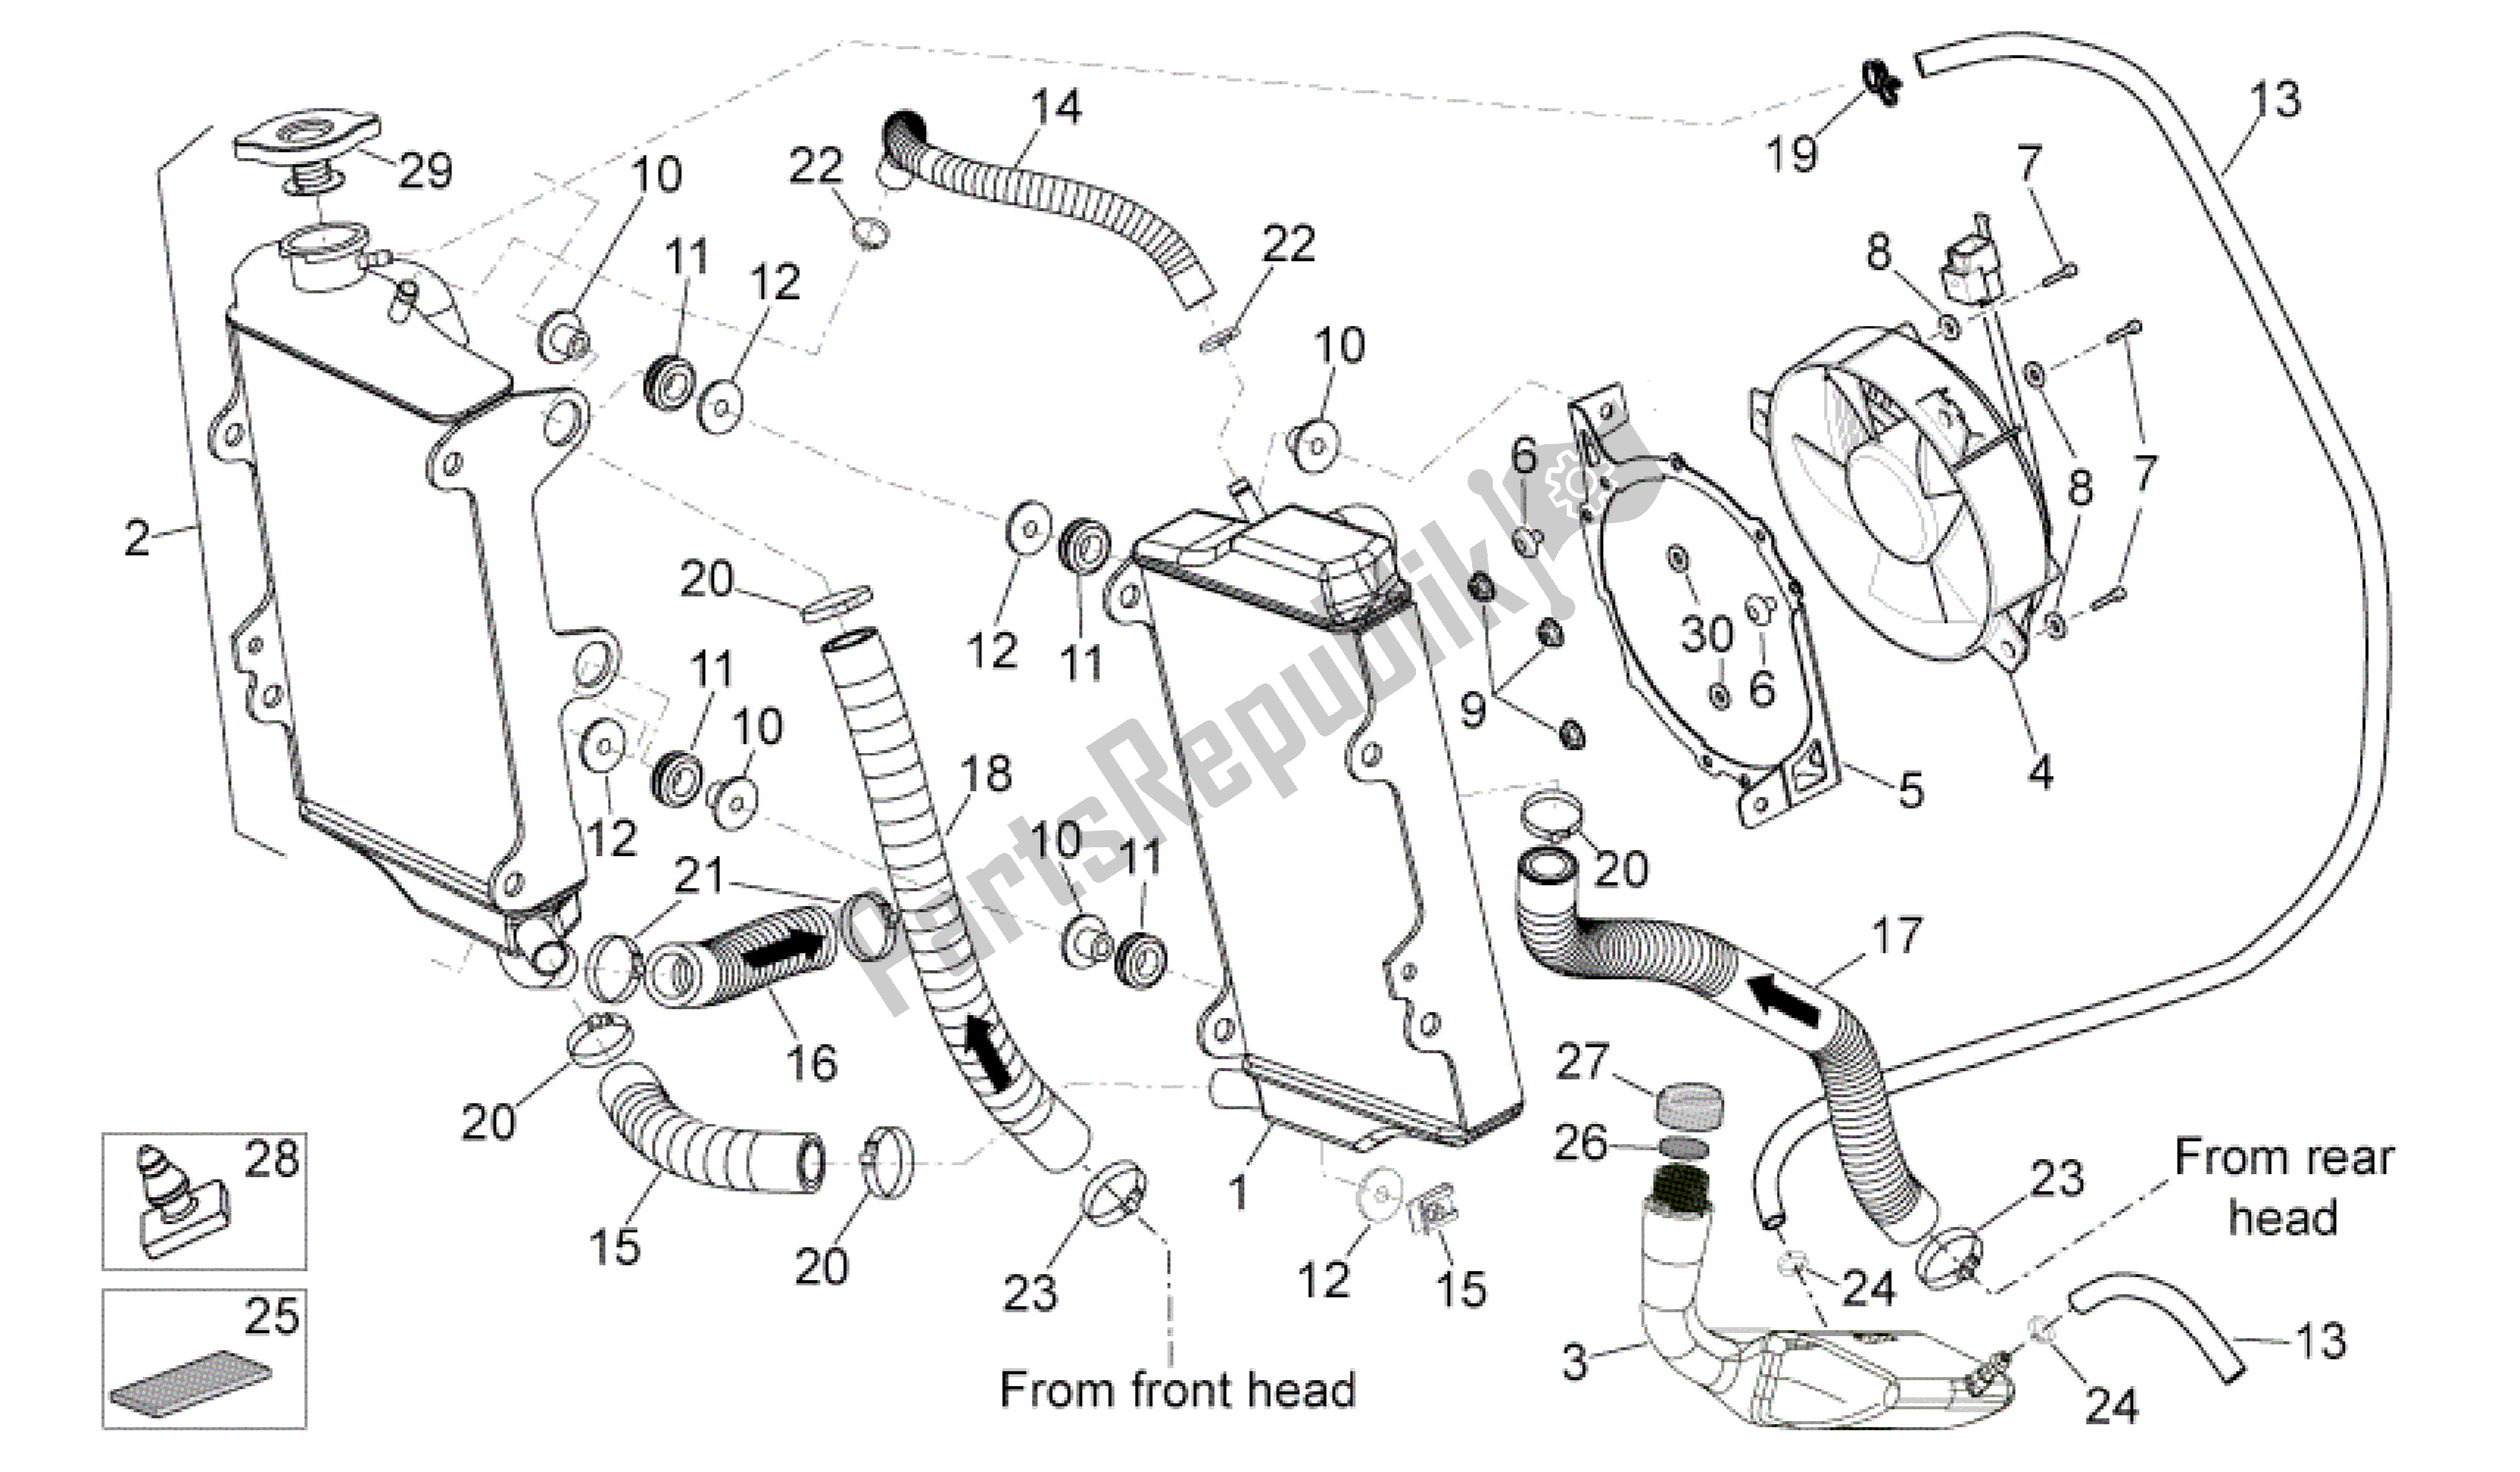 All parts for the Cooling System of the Aprilia RXV 450 2009 - 2011